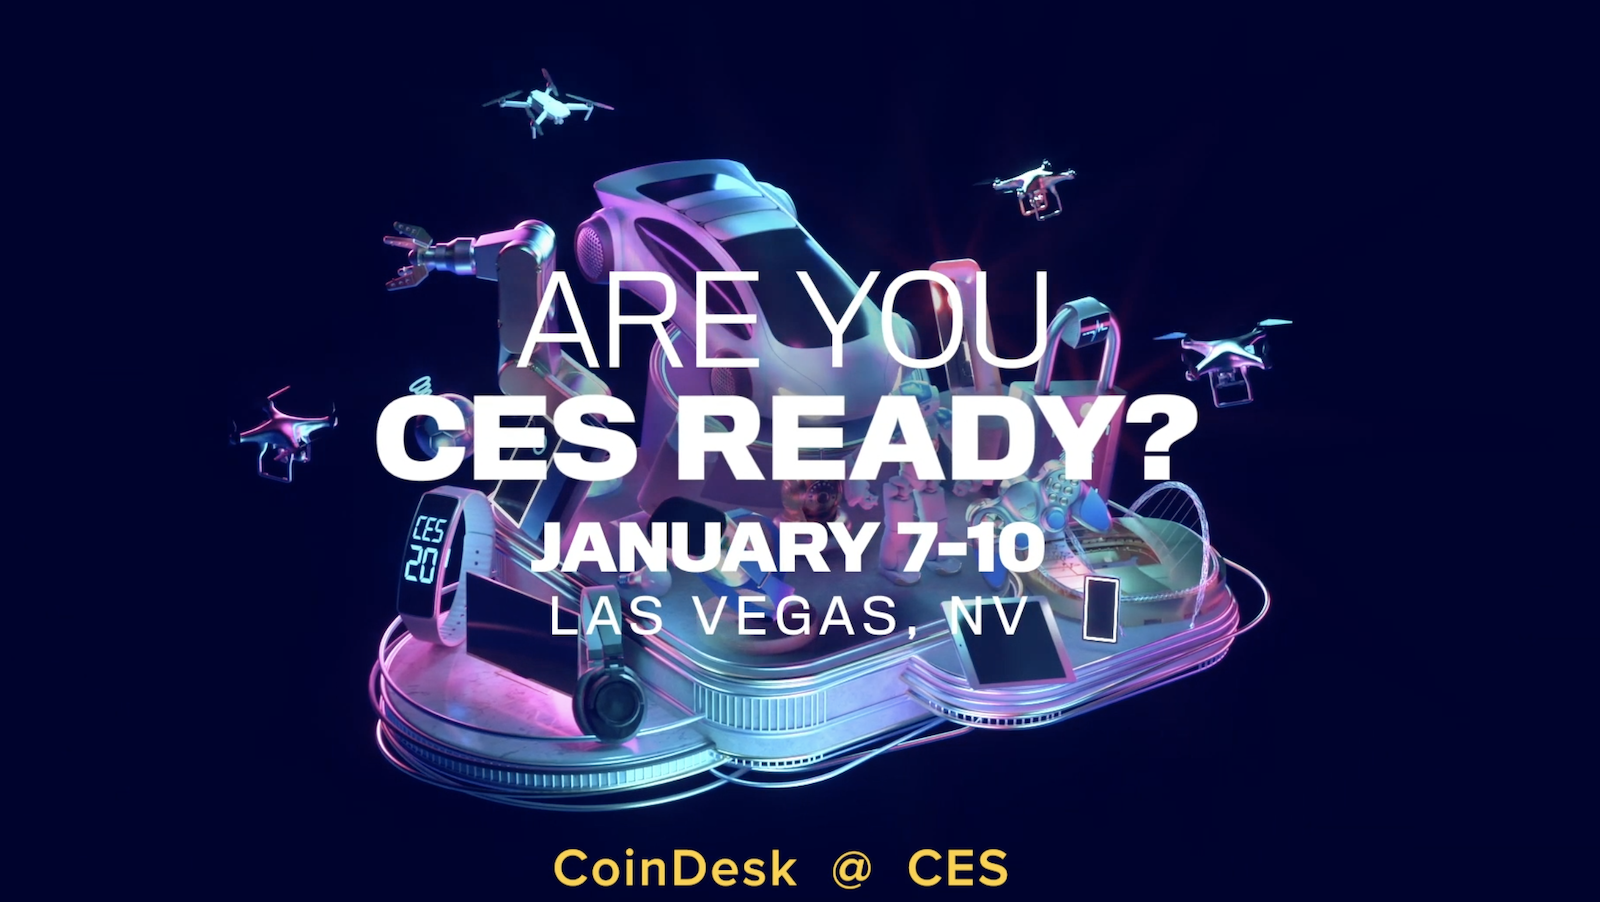 Be part of CoinDesk at CES This Week